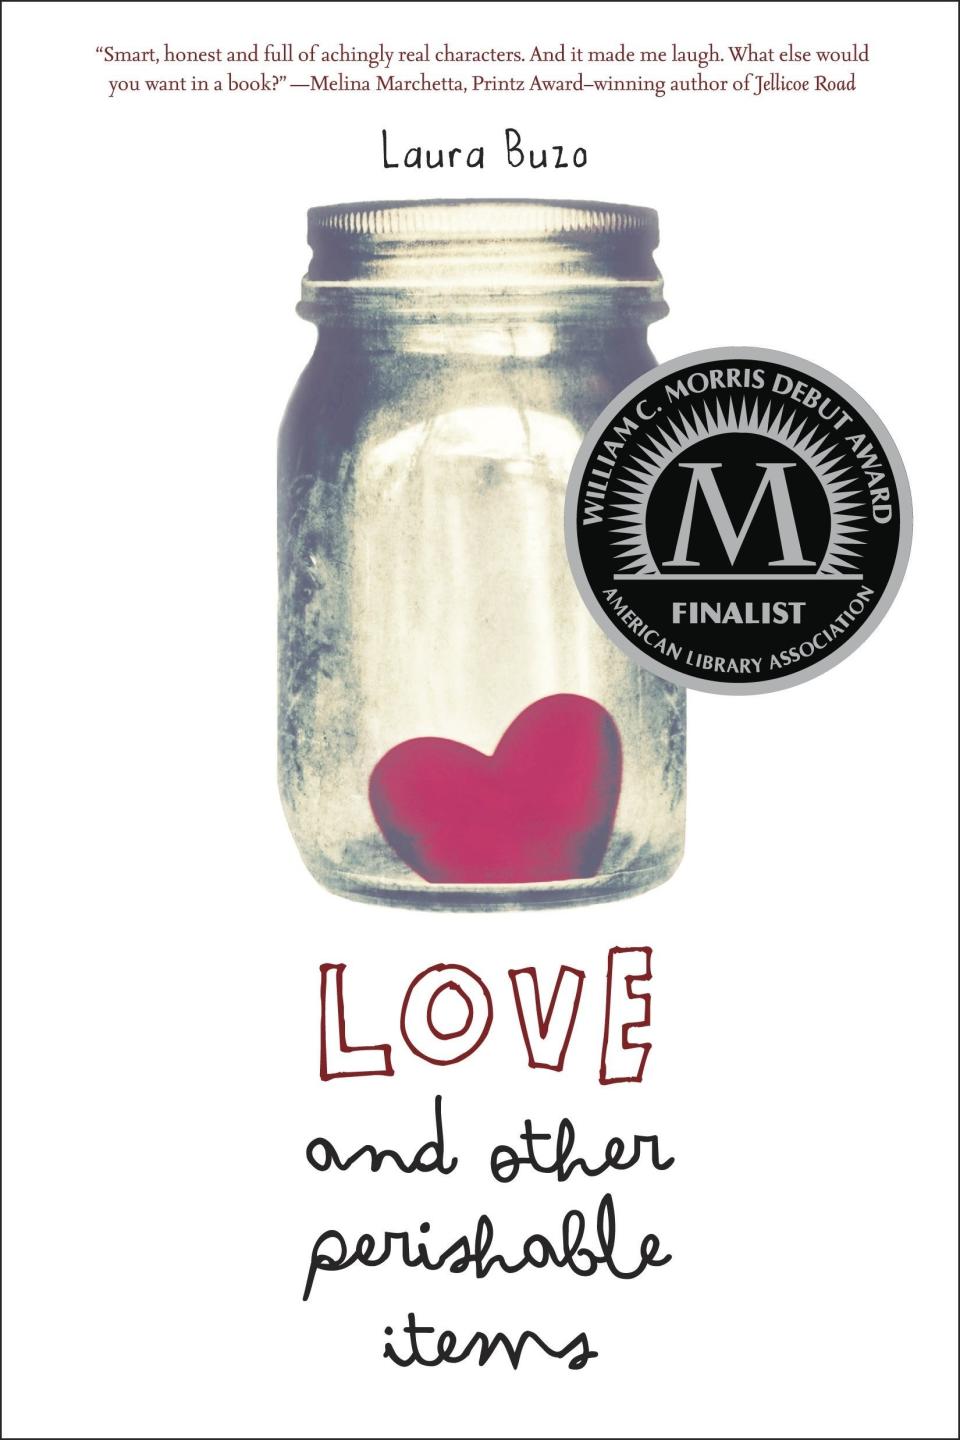 Cover shows glass jar with heart at the bottom and handwritten title text below